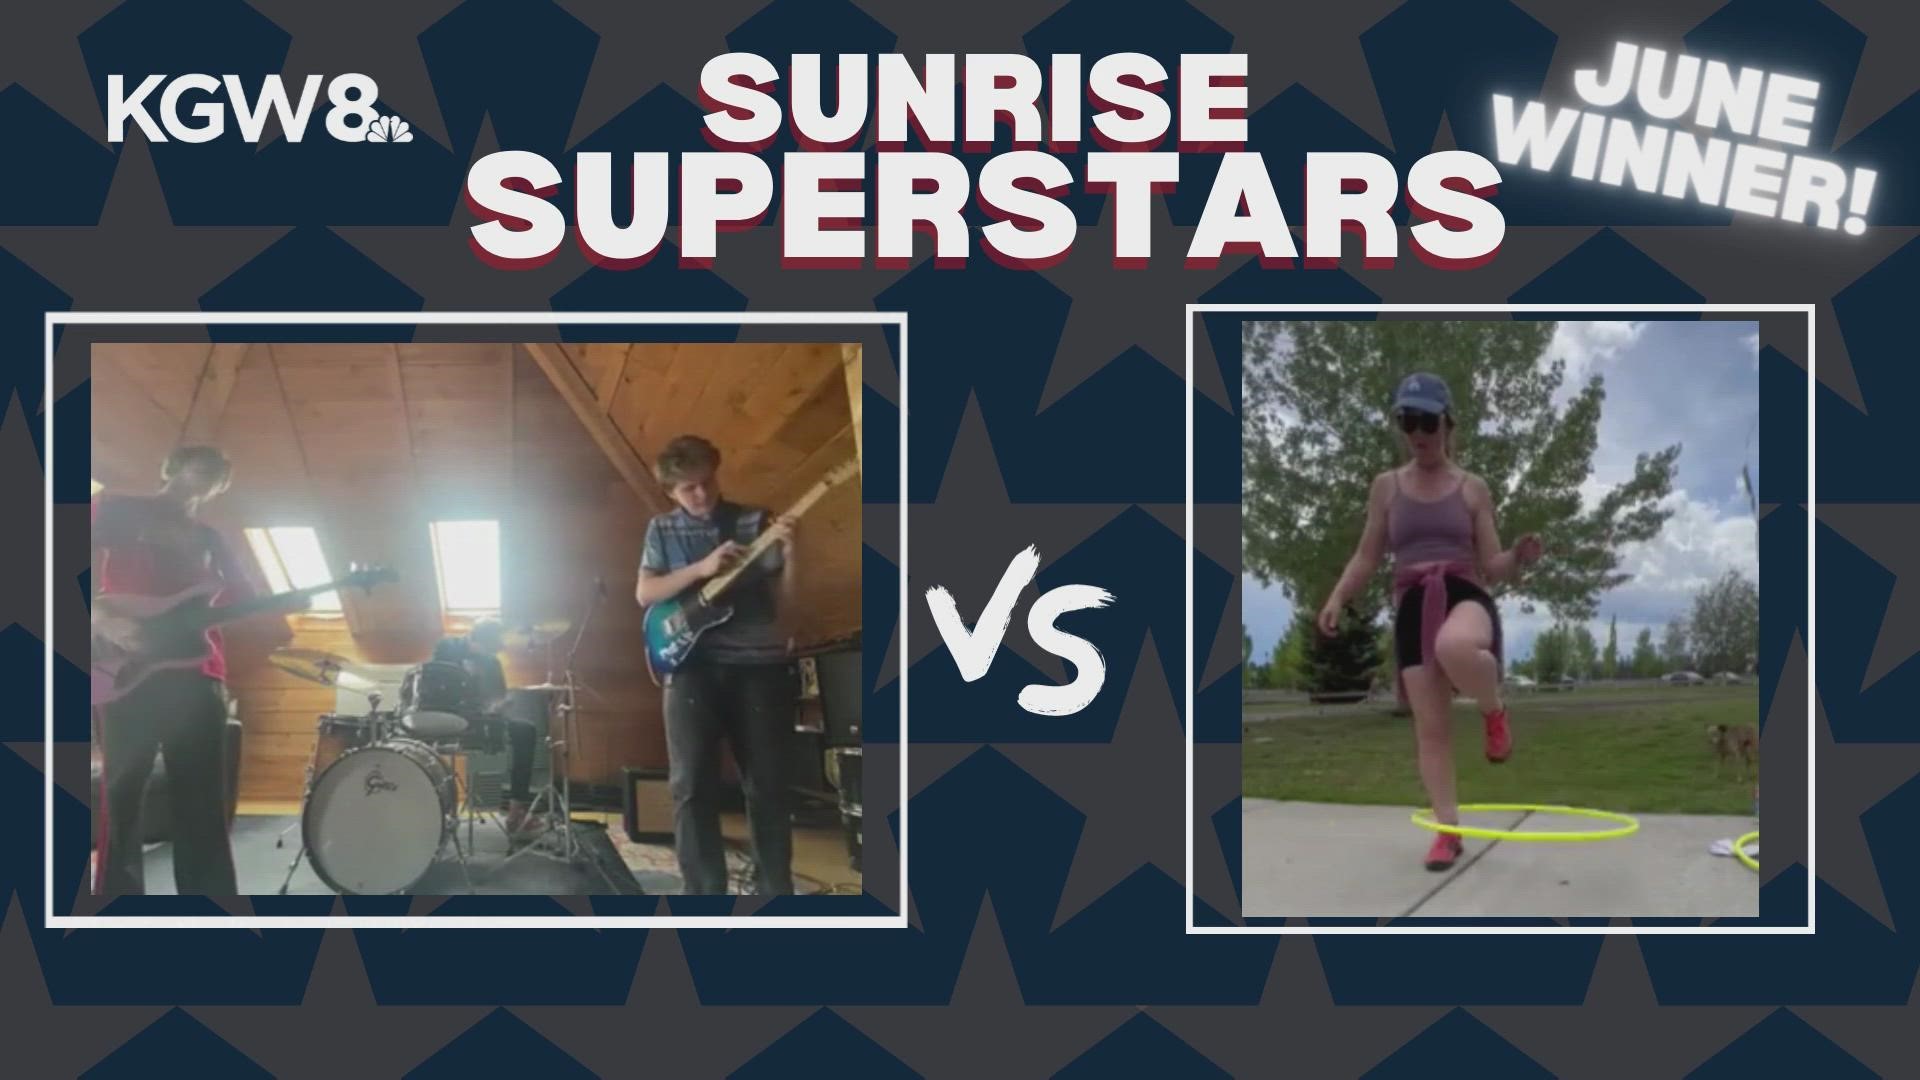 The June contestants will have a chance to compete for the grand prize of performing on KGW News at Sunrise.